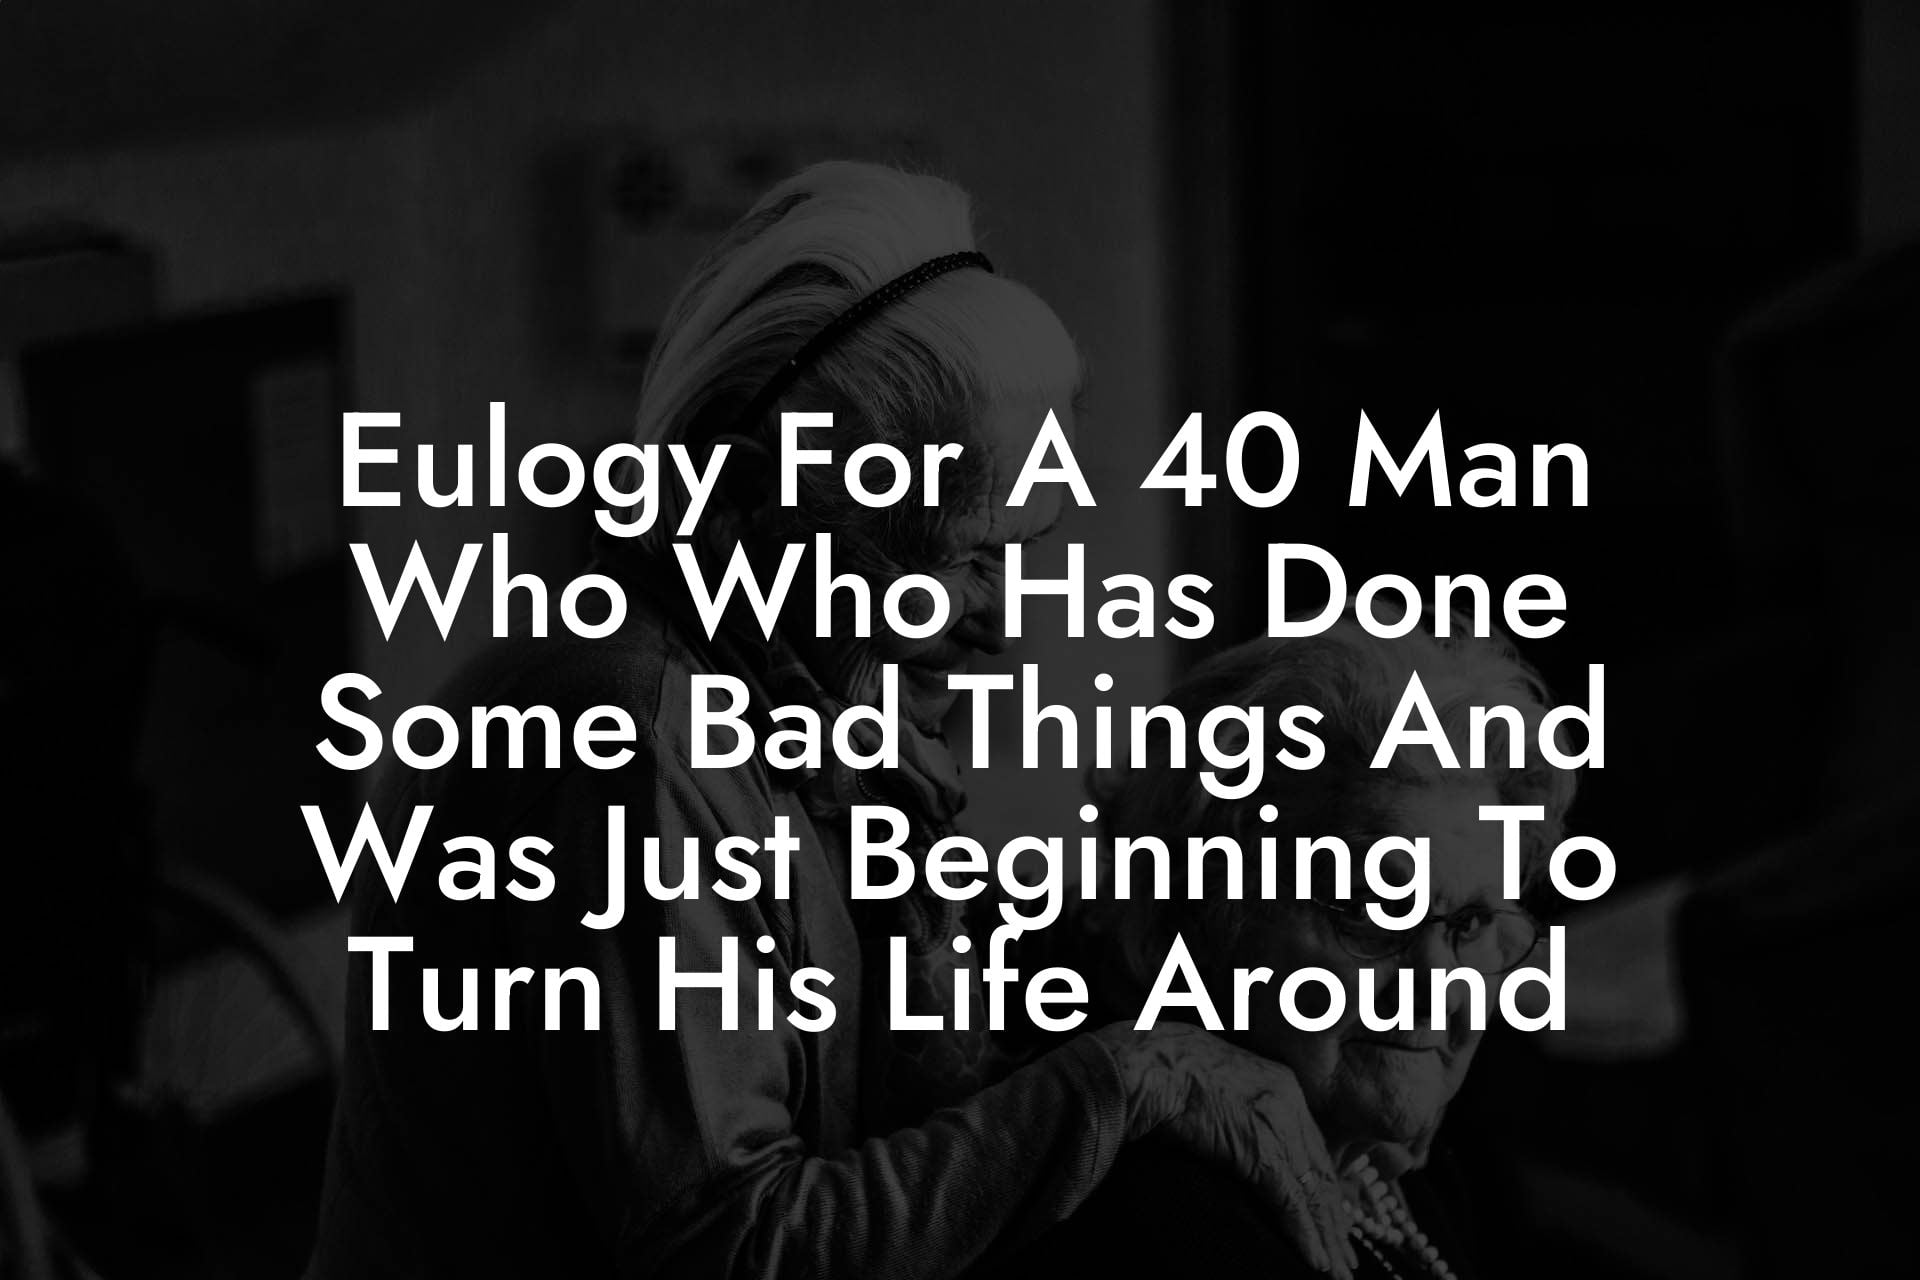 Eulogy For A 40 Man Who Who Has Done Some Bad Things And Was Just Beginning To Turn His Life Around